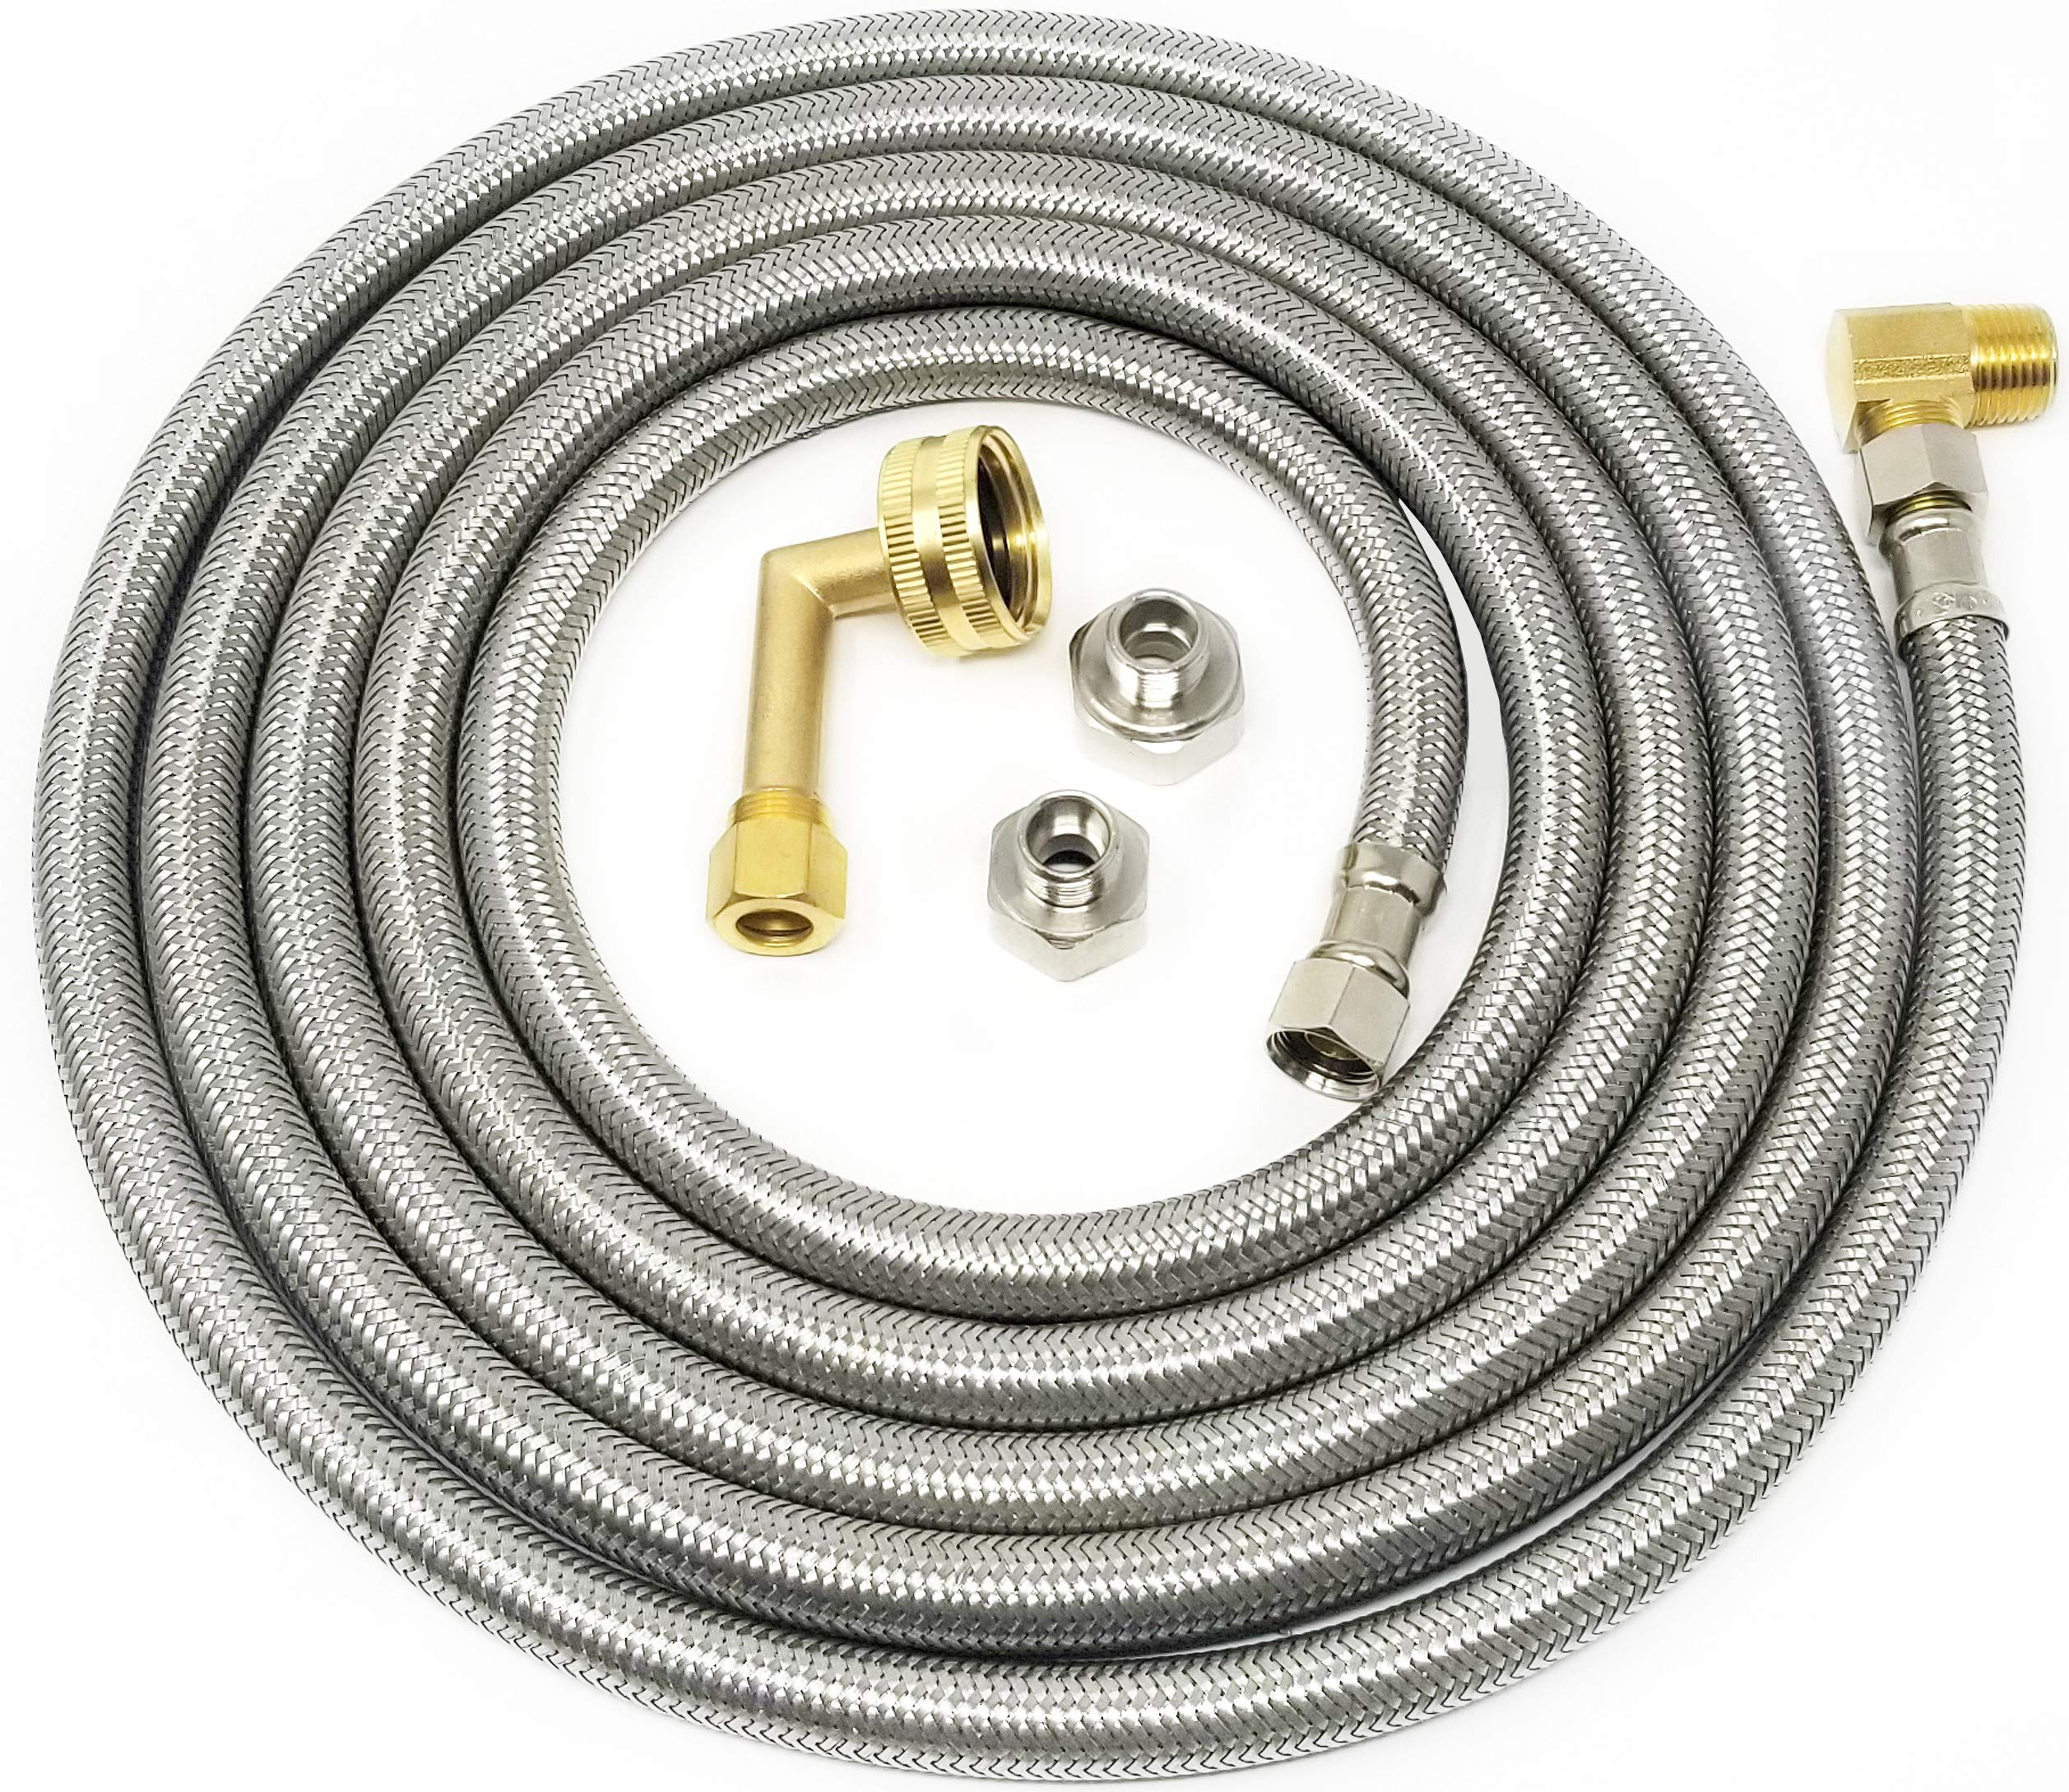 Kelaro Stainless Steel Dishwasher Hose Kit (12 Ft) Burst Proof Water Supply Line with 3/8" Compression Connections from Kelaro